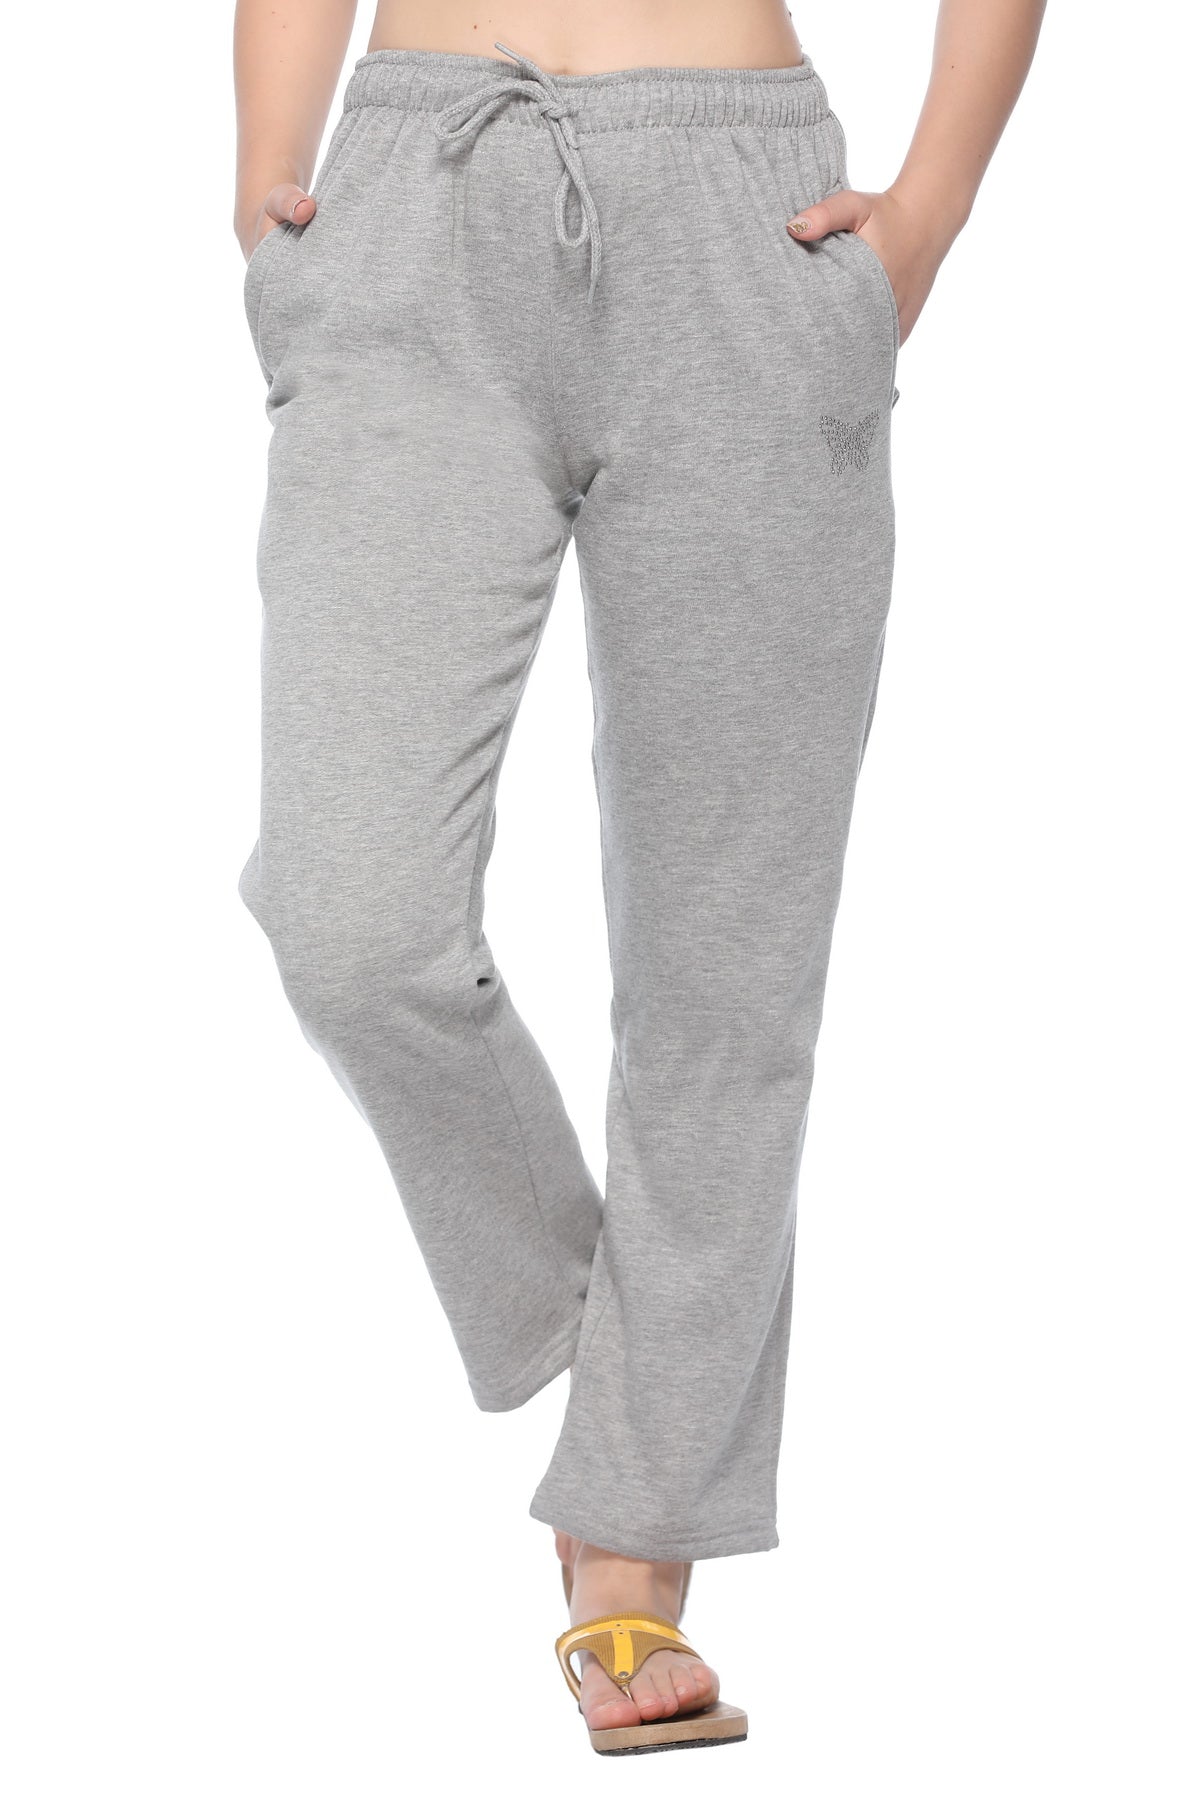 Buy PERF Women Regular fit Cotton Solid Track pants  Grey Online at 50  off Paytm Mall